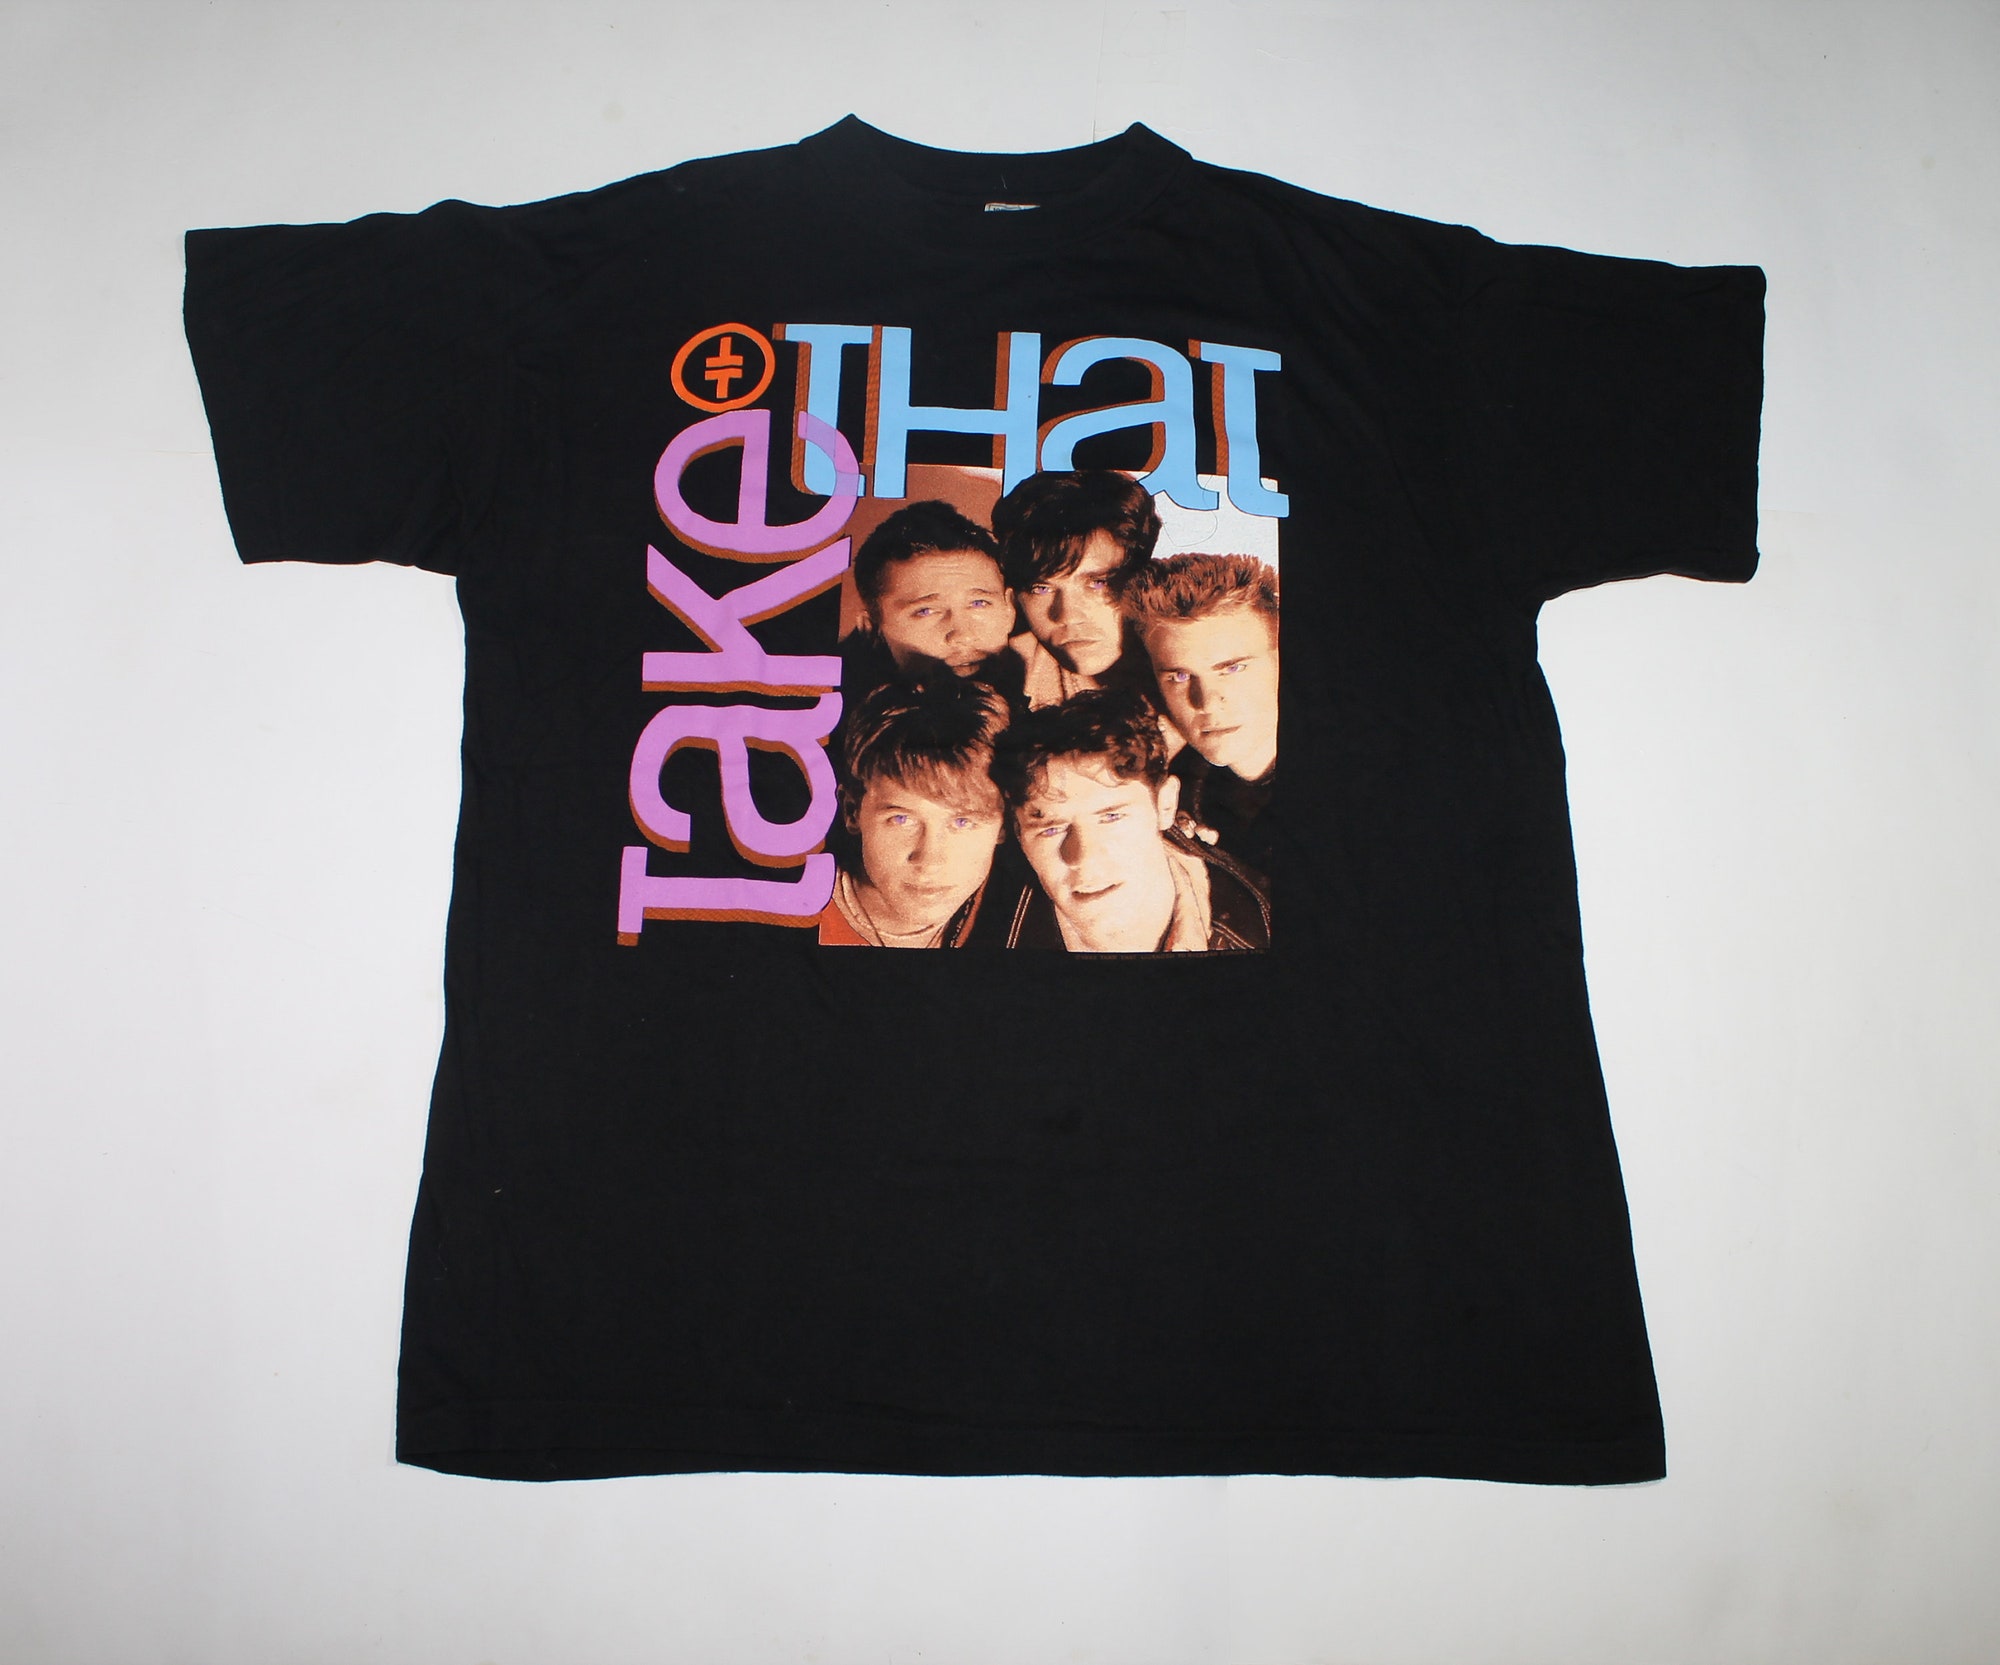 Discover 1993 Take That and Party shirt England pop band shirt